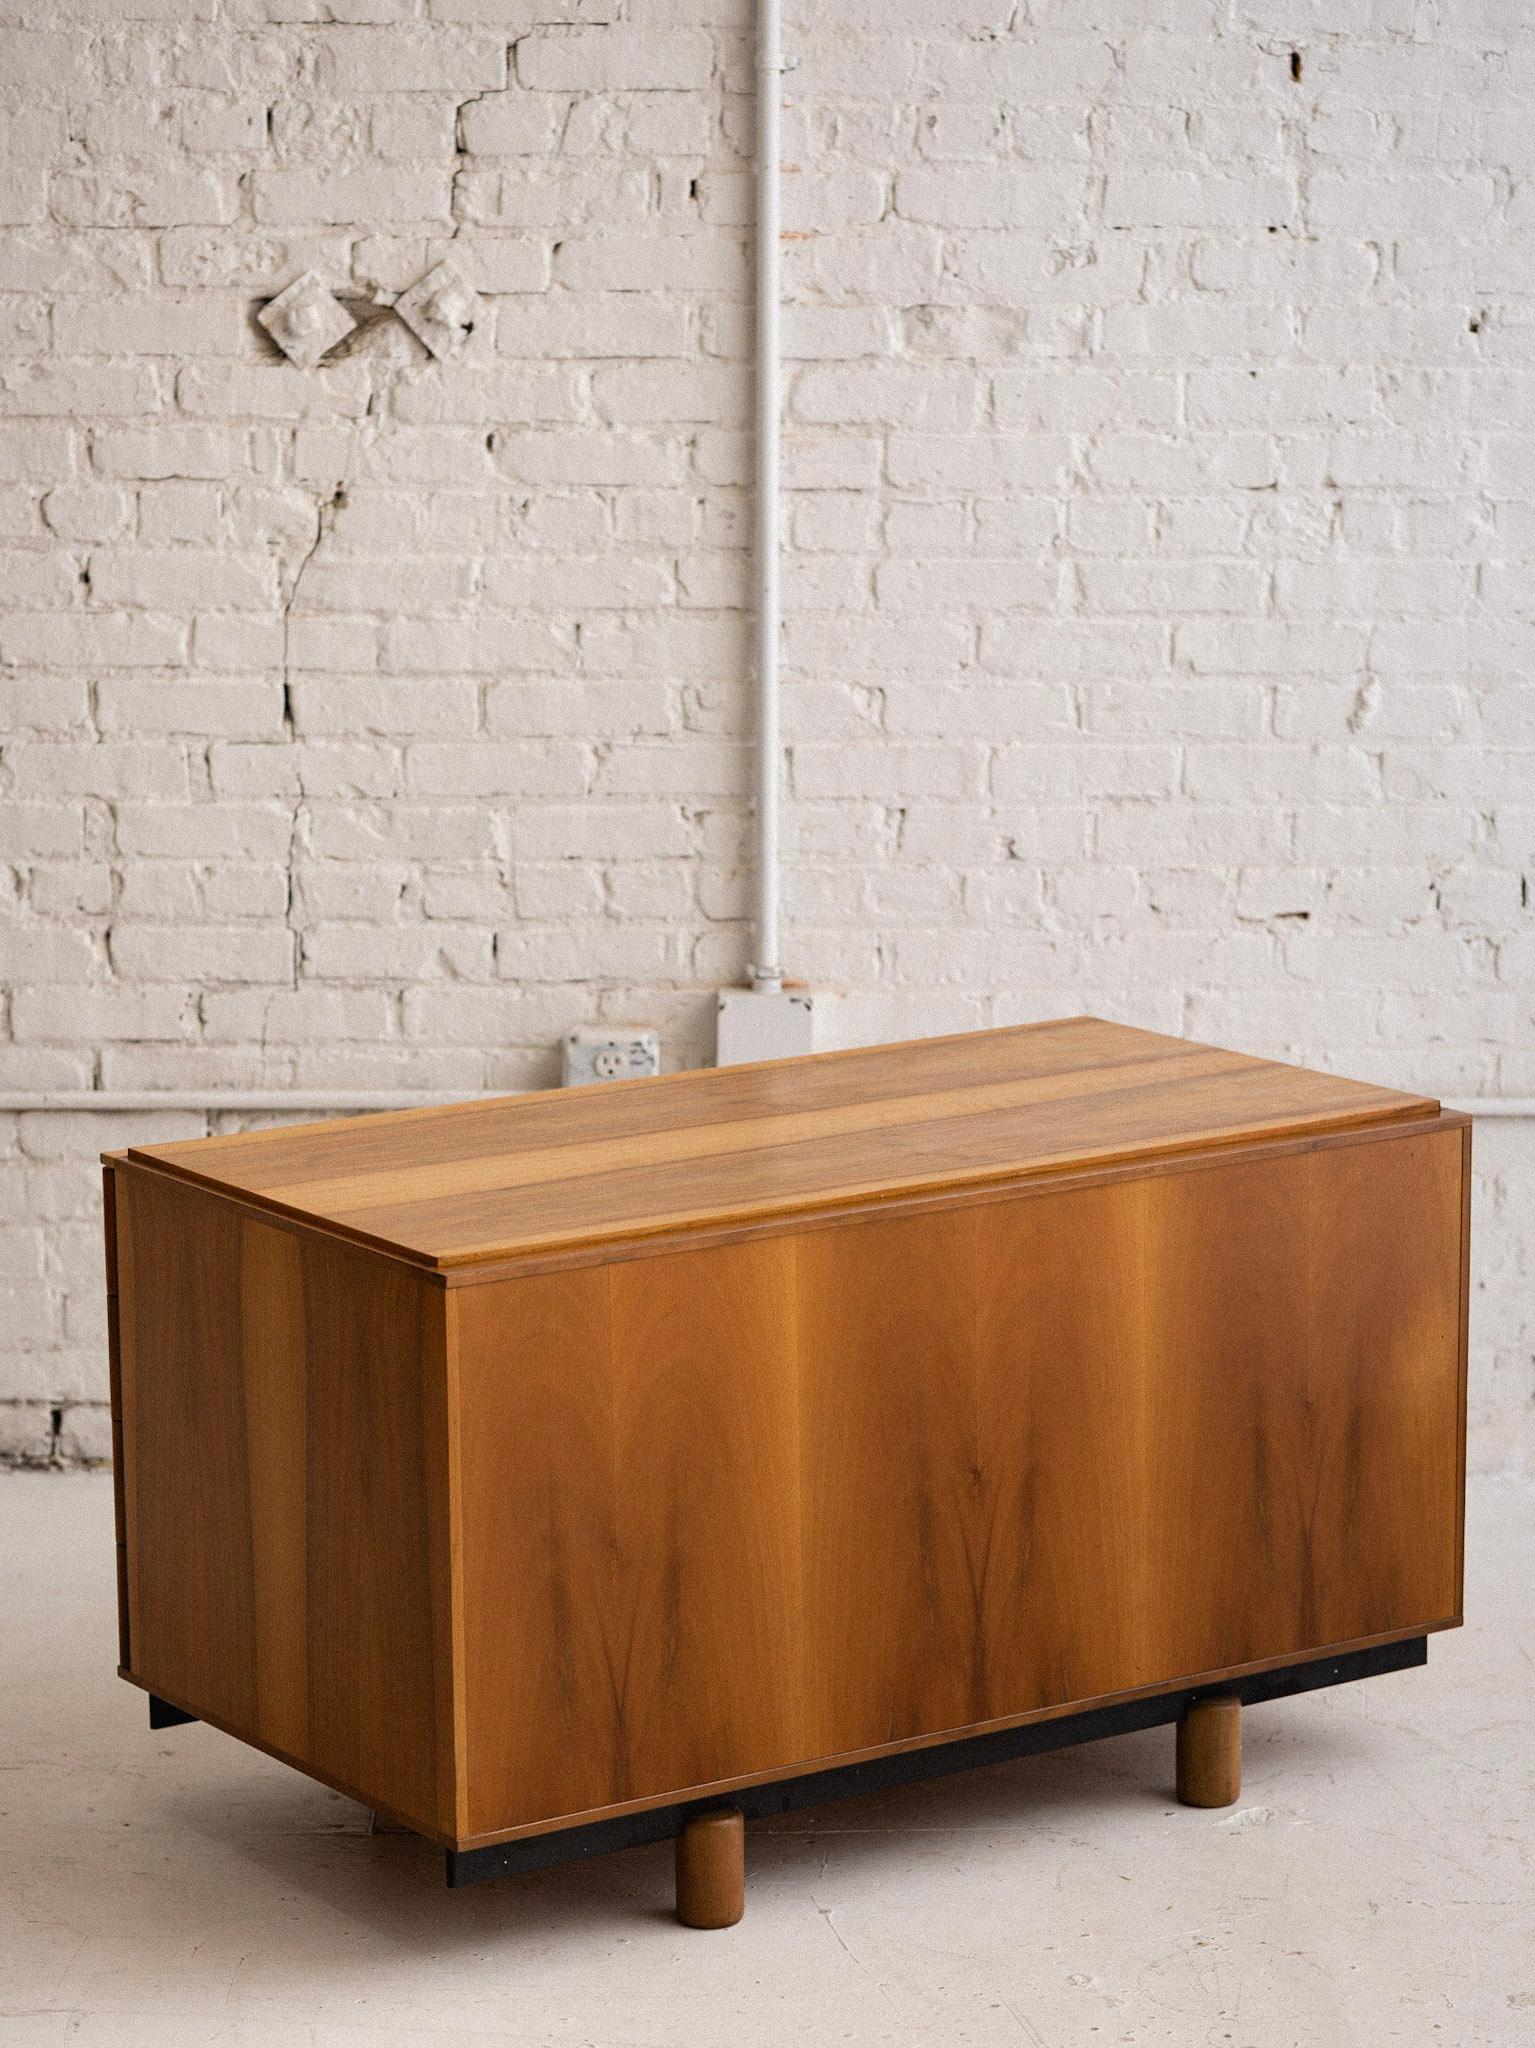 Mid-20th Century ‘Ovunque 807’ Modular 8 Drawer Sideboard by Gianfranco Frattini for Bernini For Sale